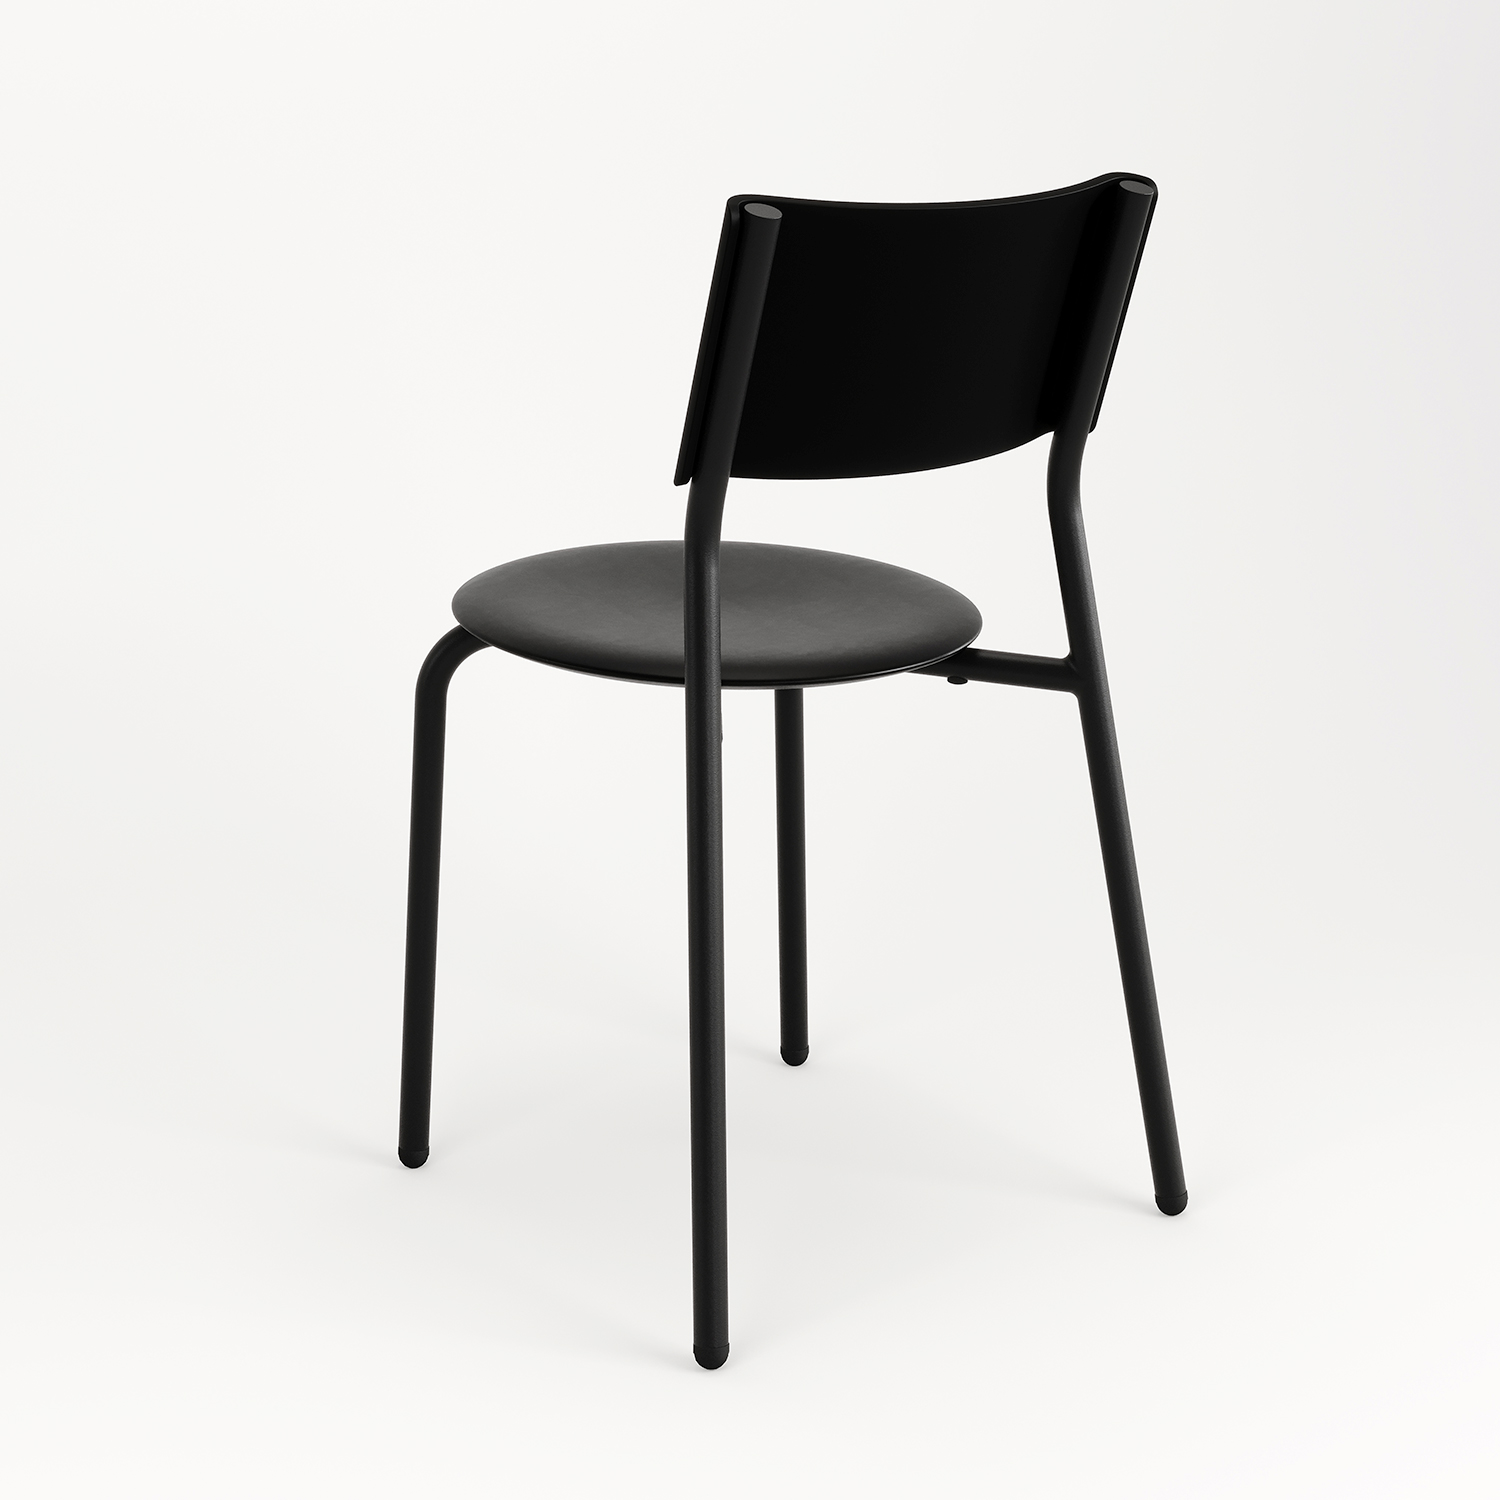 SSDr outdoor chair - MIDI collection